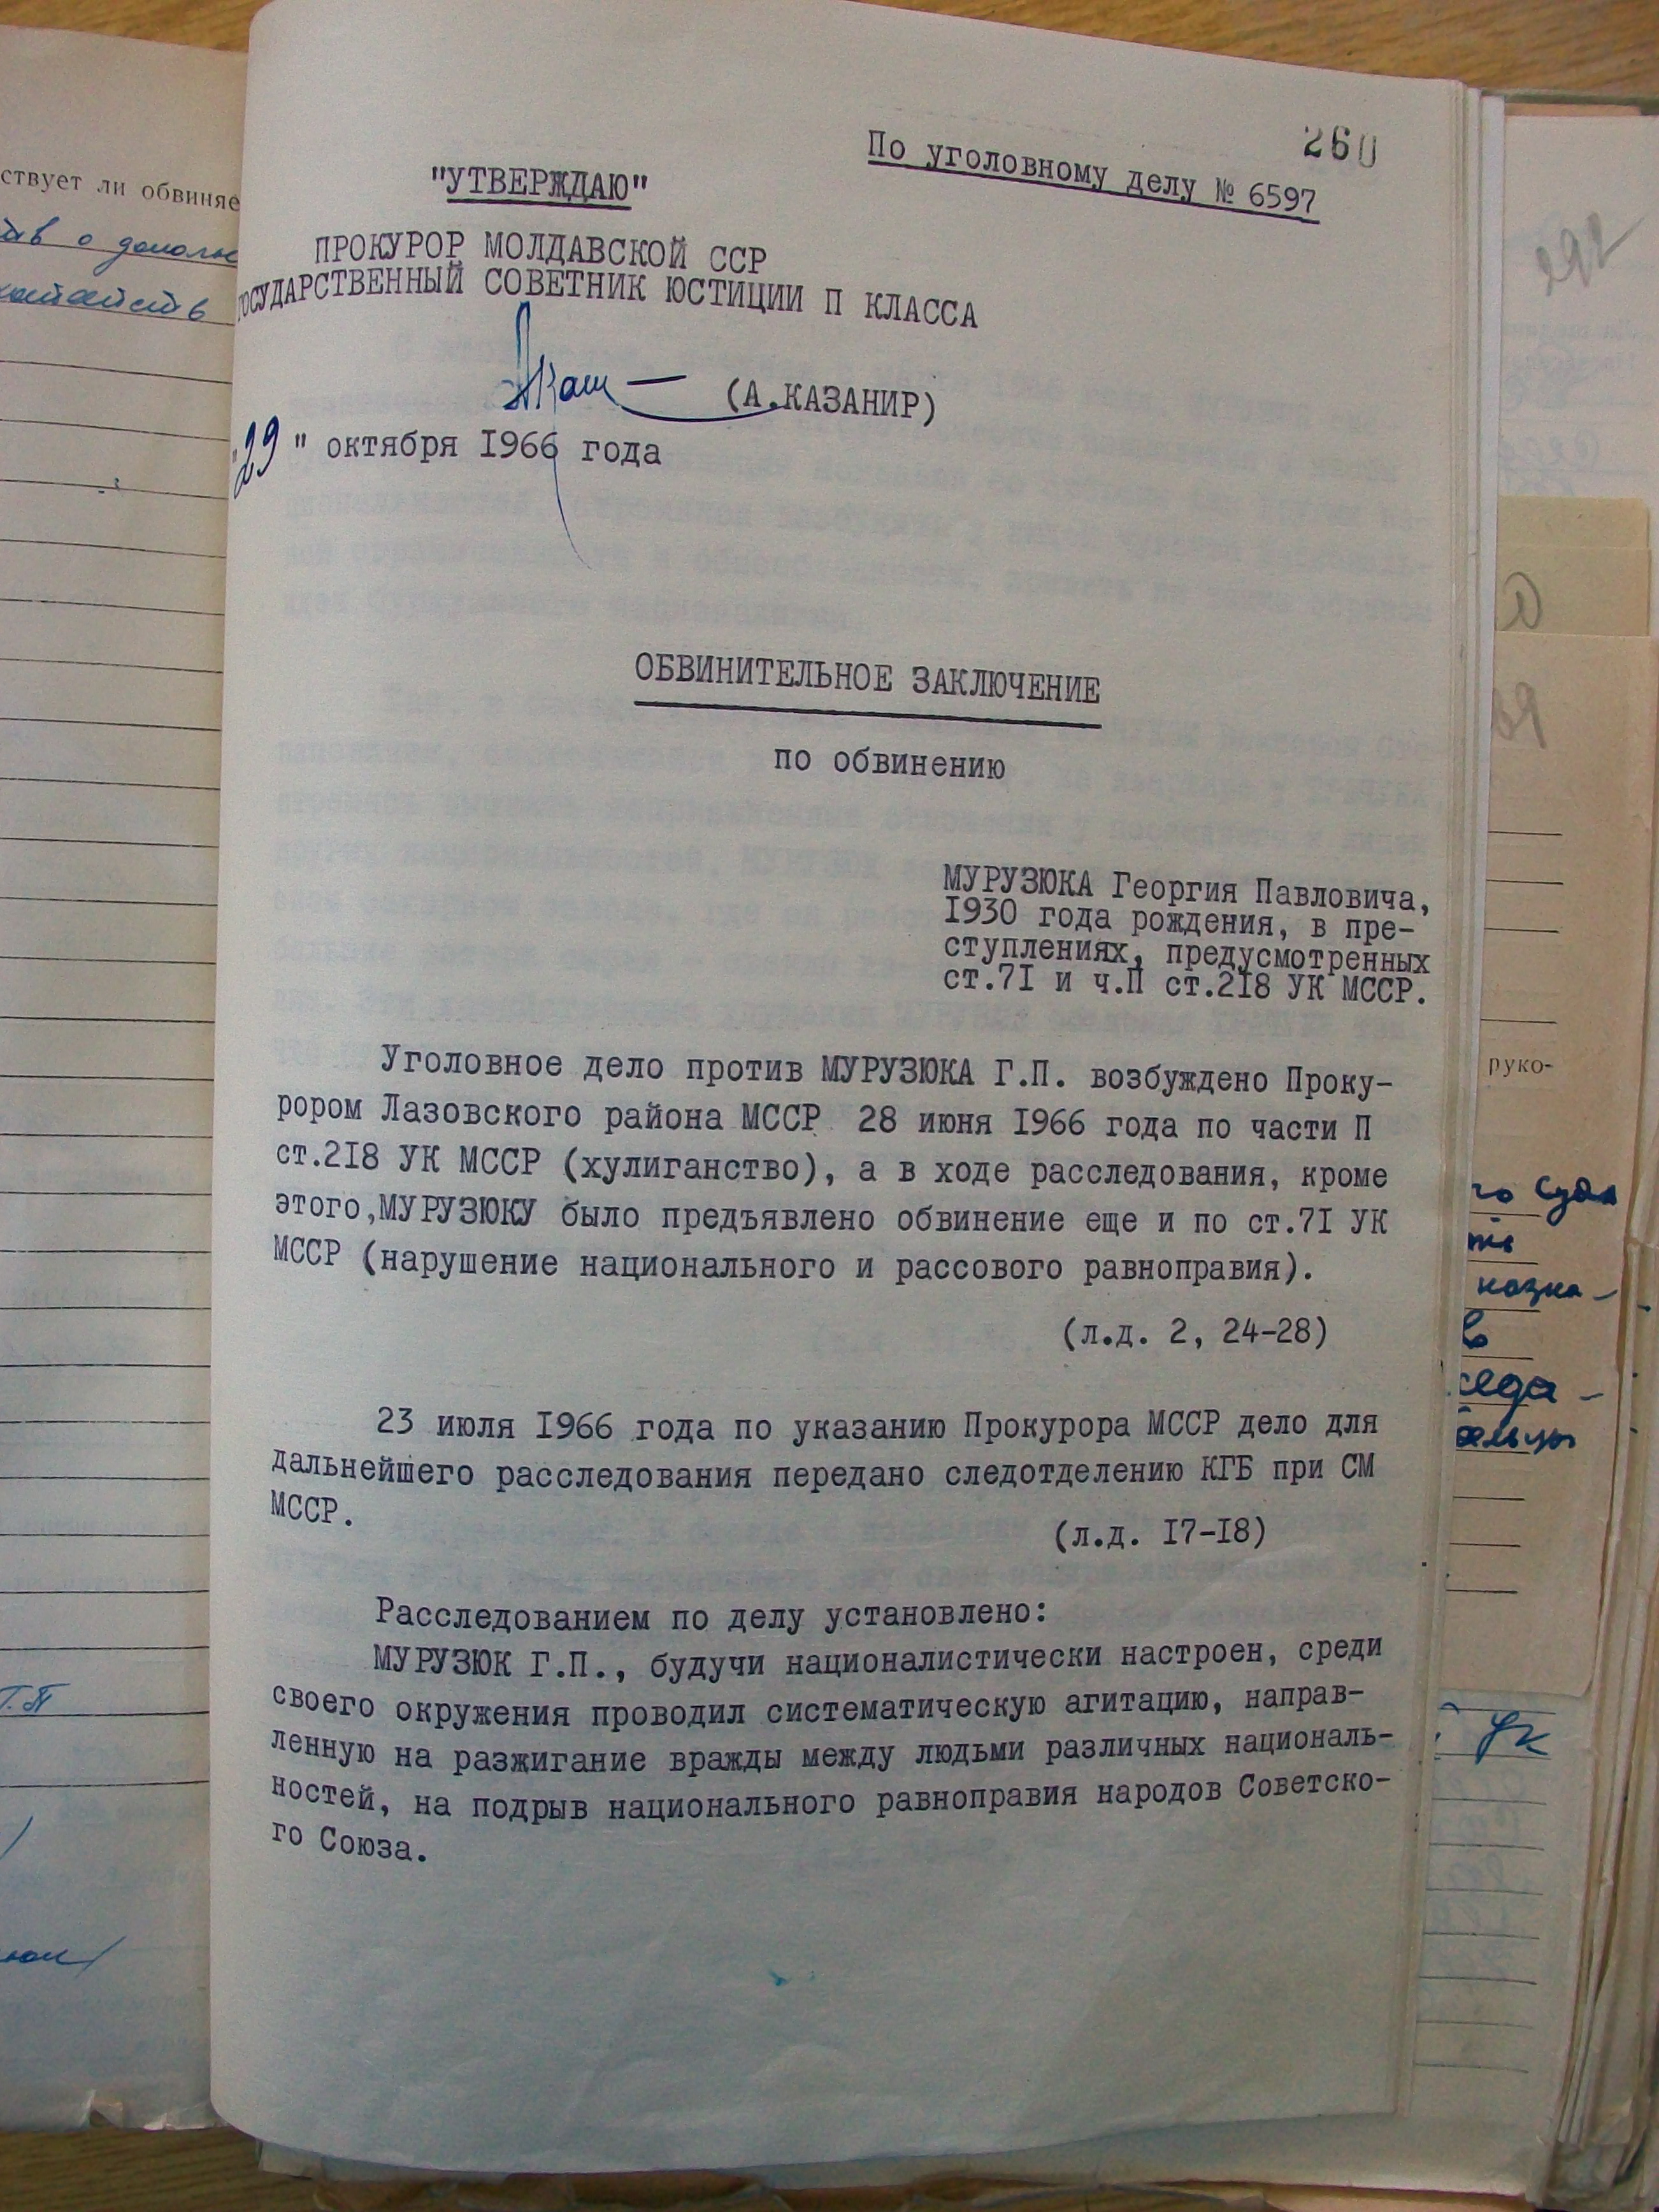 First page of official accusatory act concerning the case of Gheorghe Muruziuc, October 1966